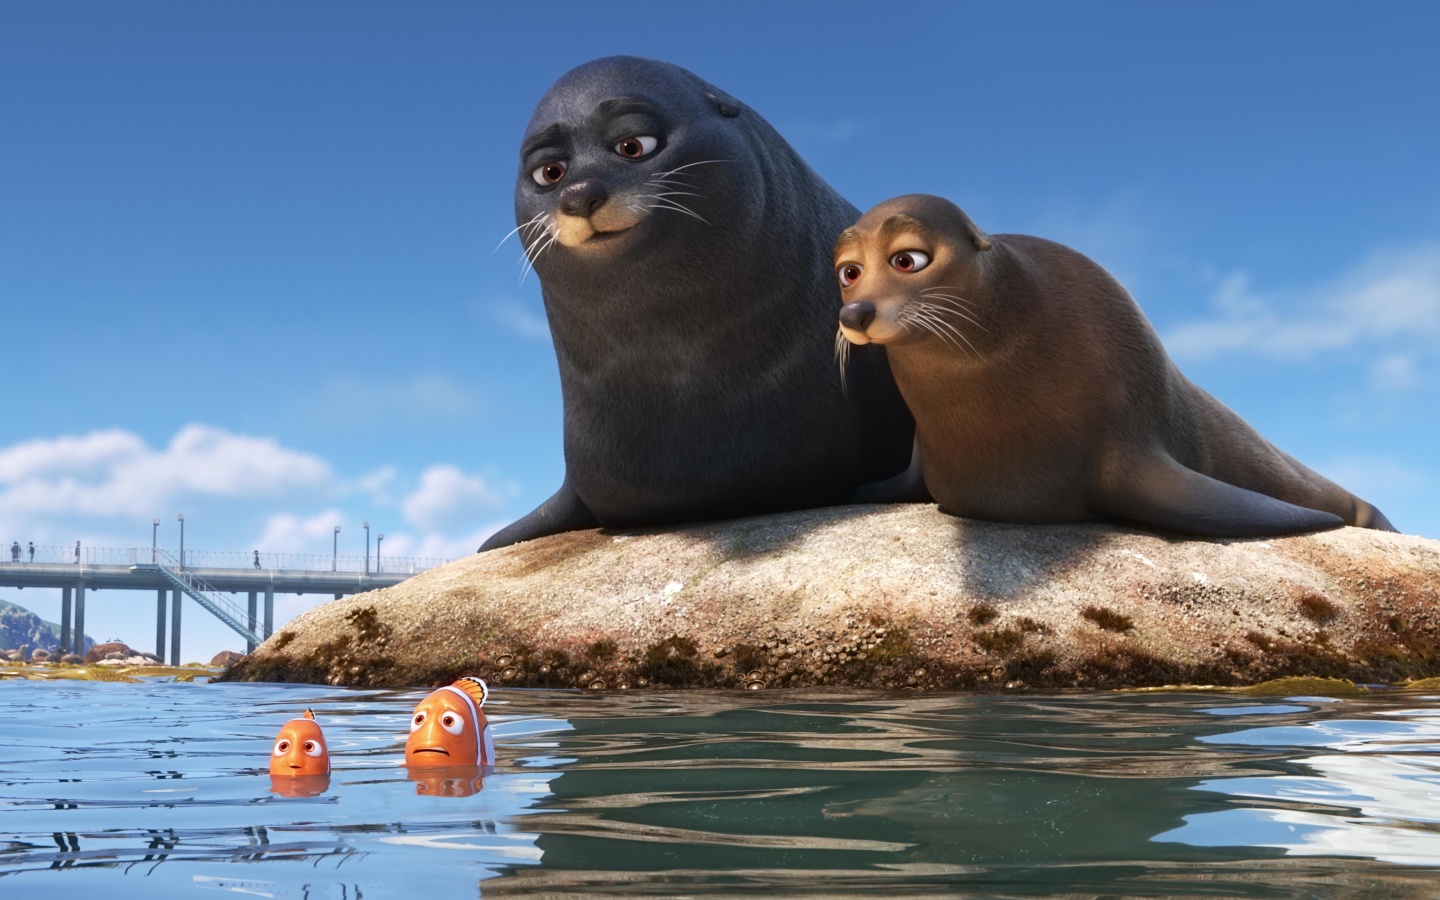 Das Finding Dory with Fish and Seal Wallpaper 1440x900